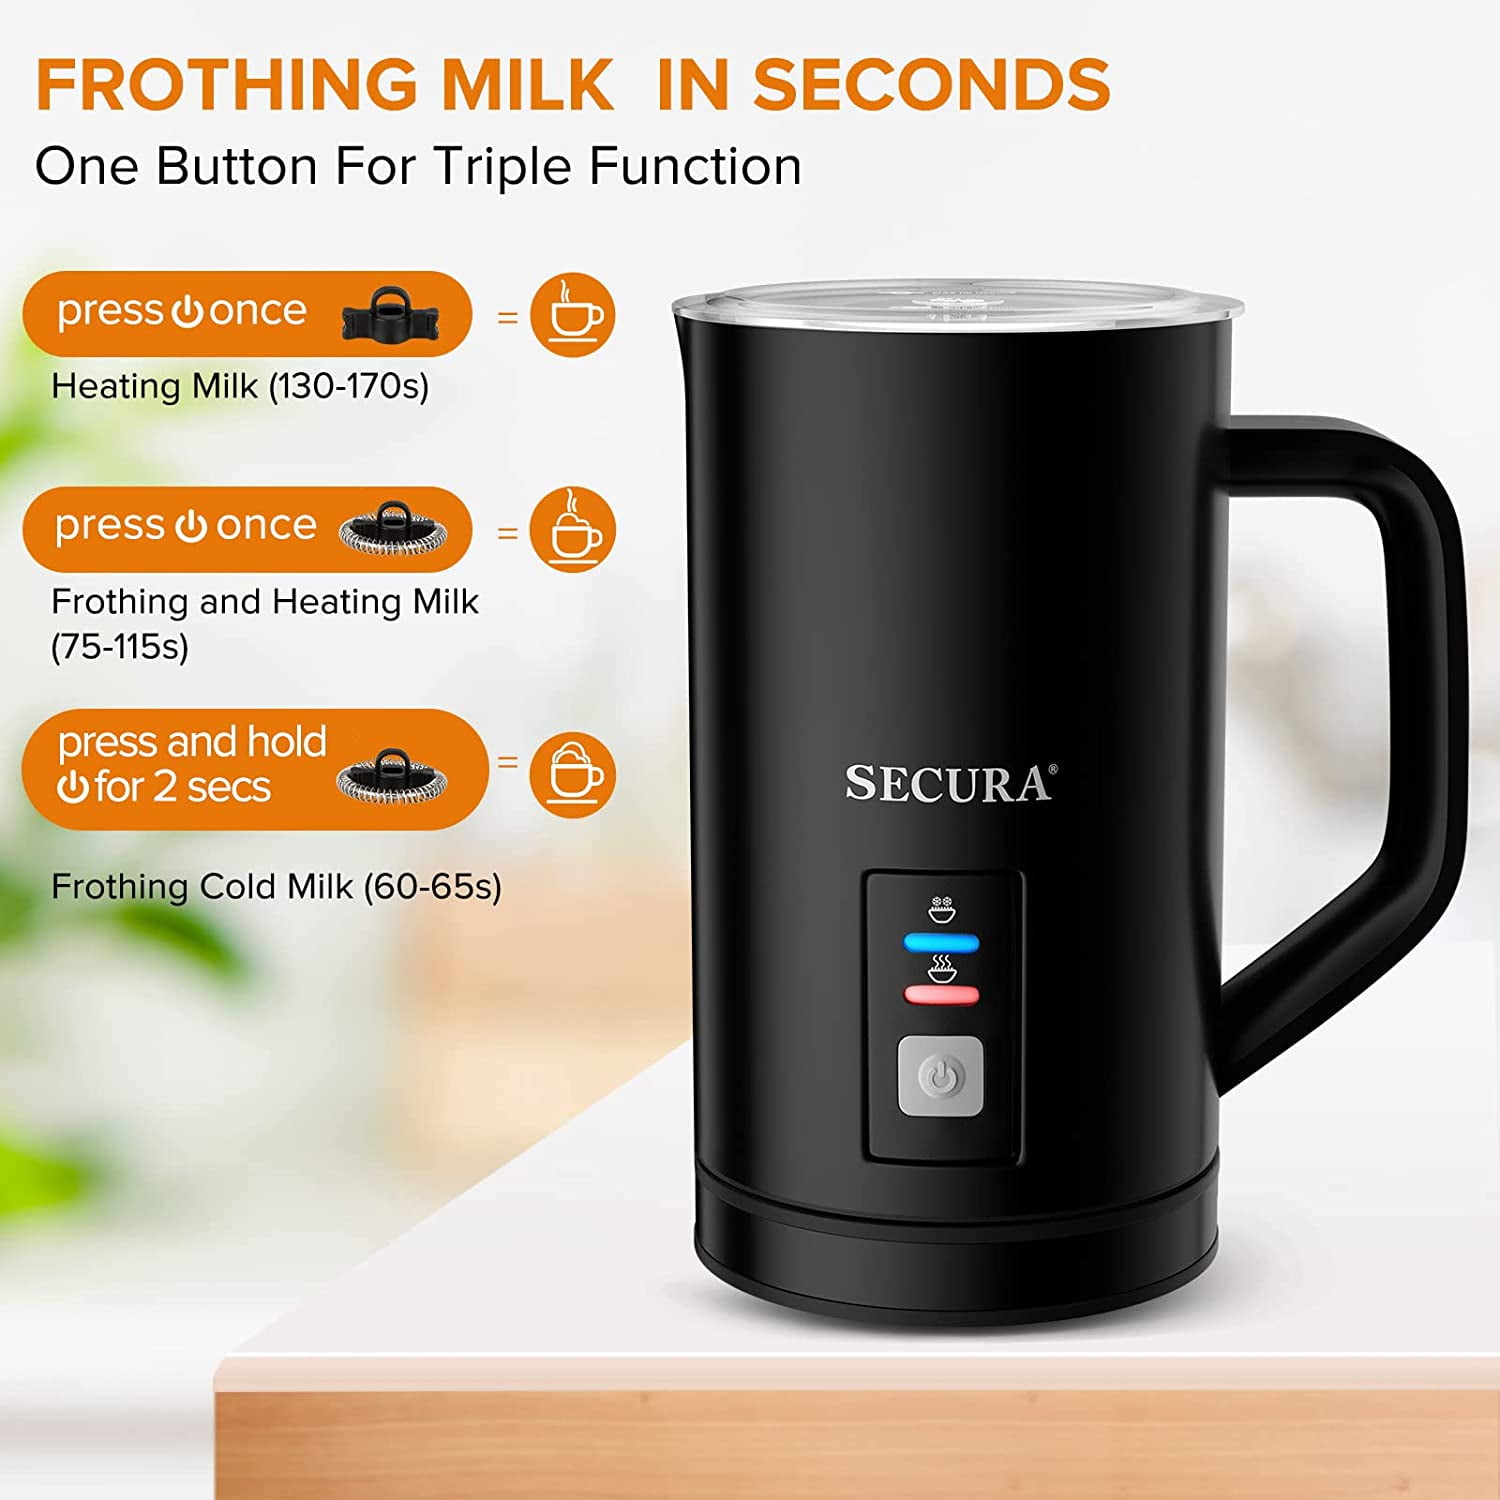 Secura Electric Automatic Milk Frother and Hot Chocolate Maker Machine  250ml 17 oz Stainless Steel Dishwasher Safe Removable Milk Jug - The Secura